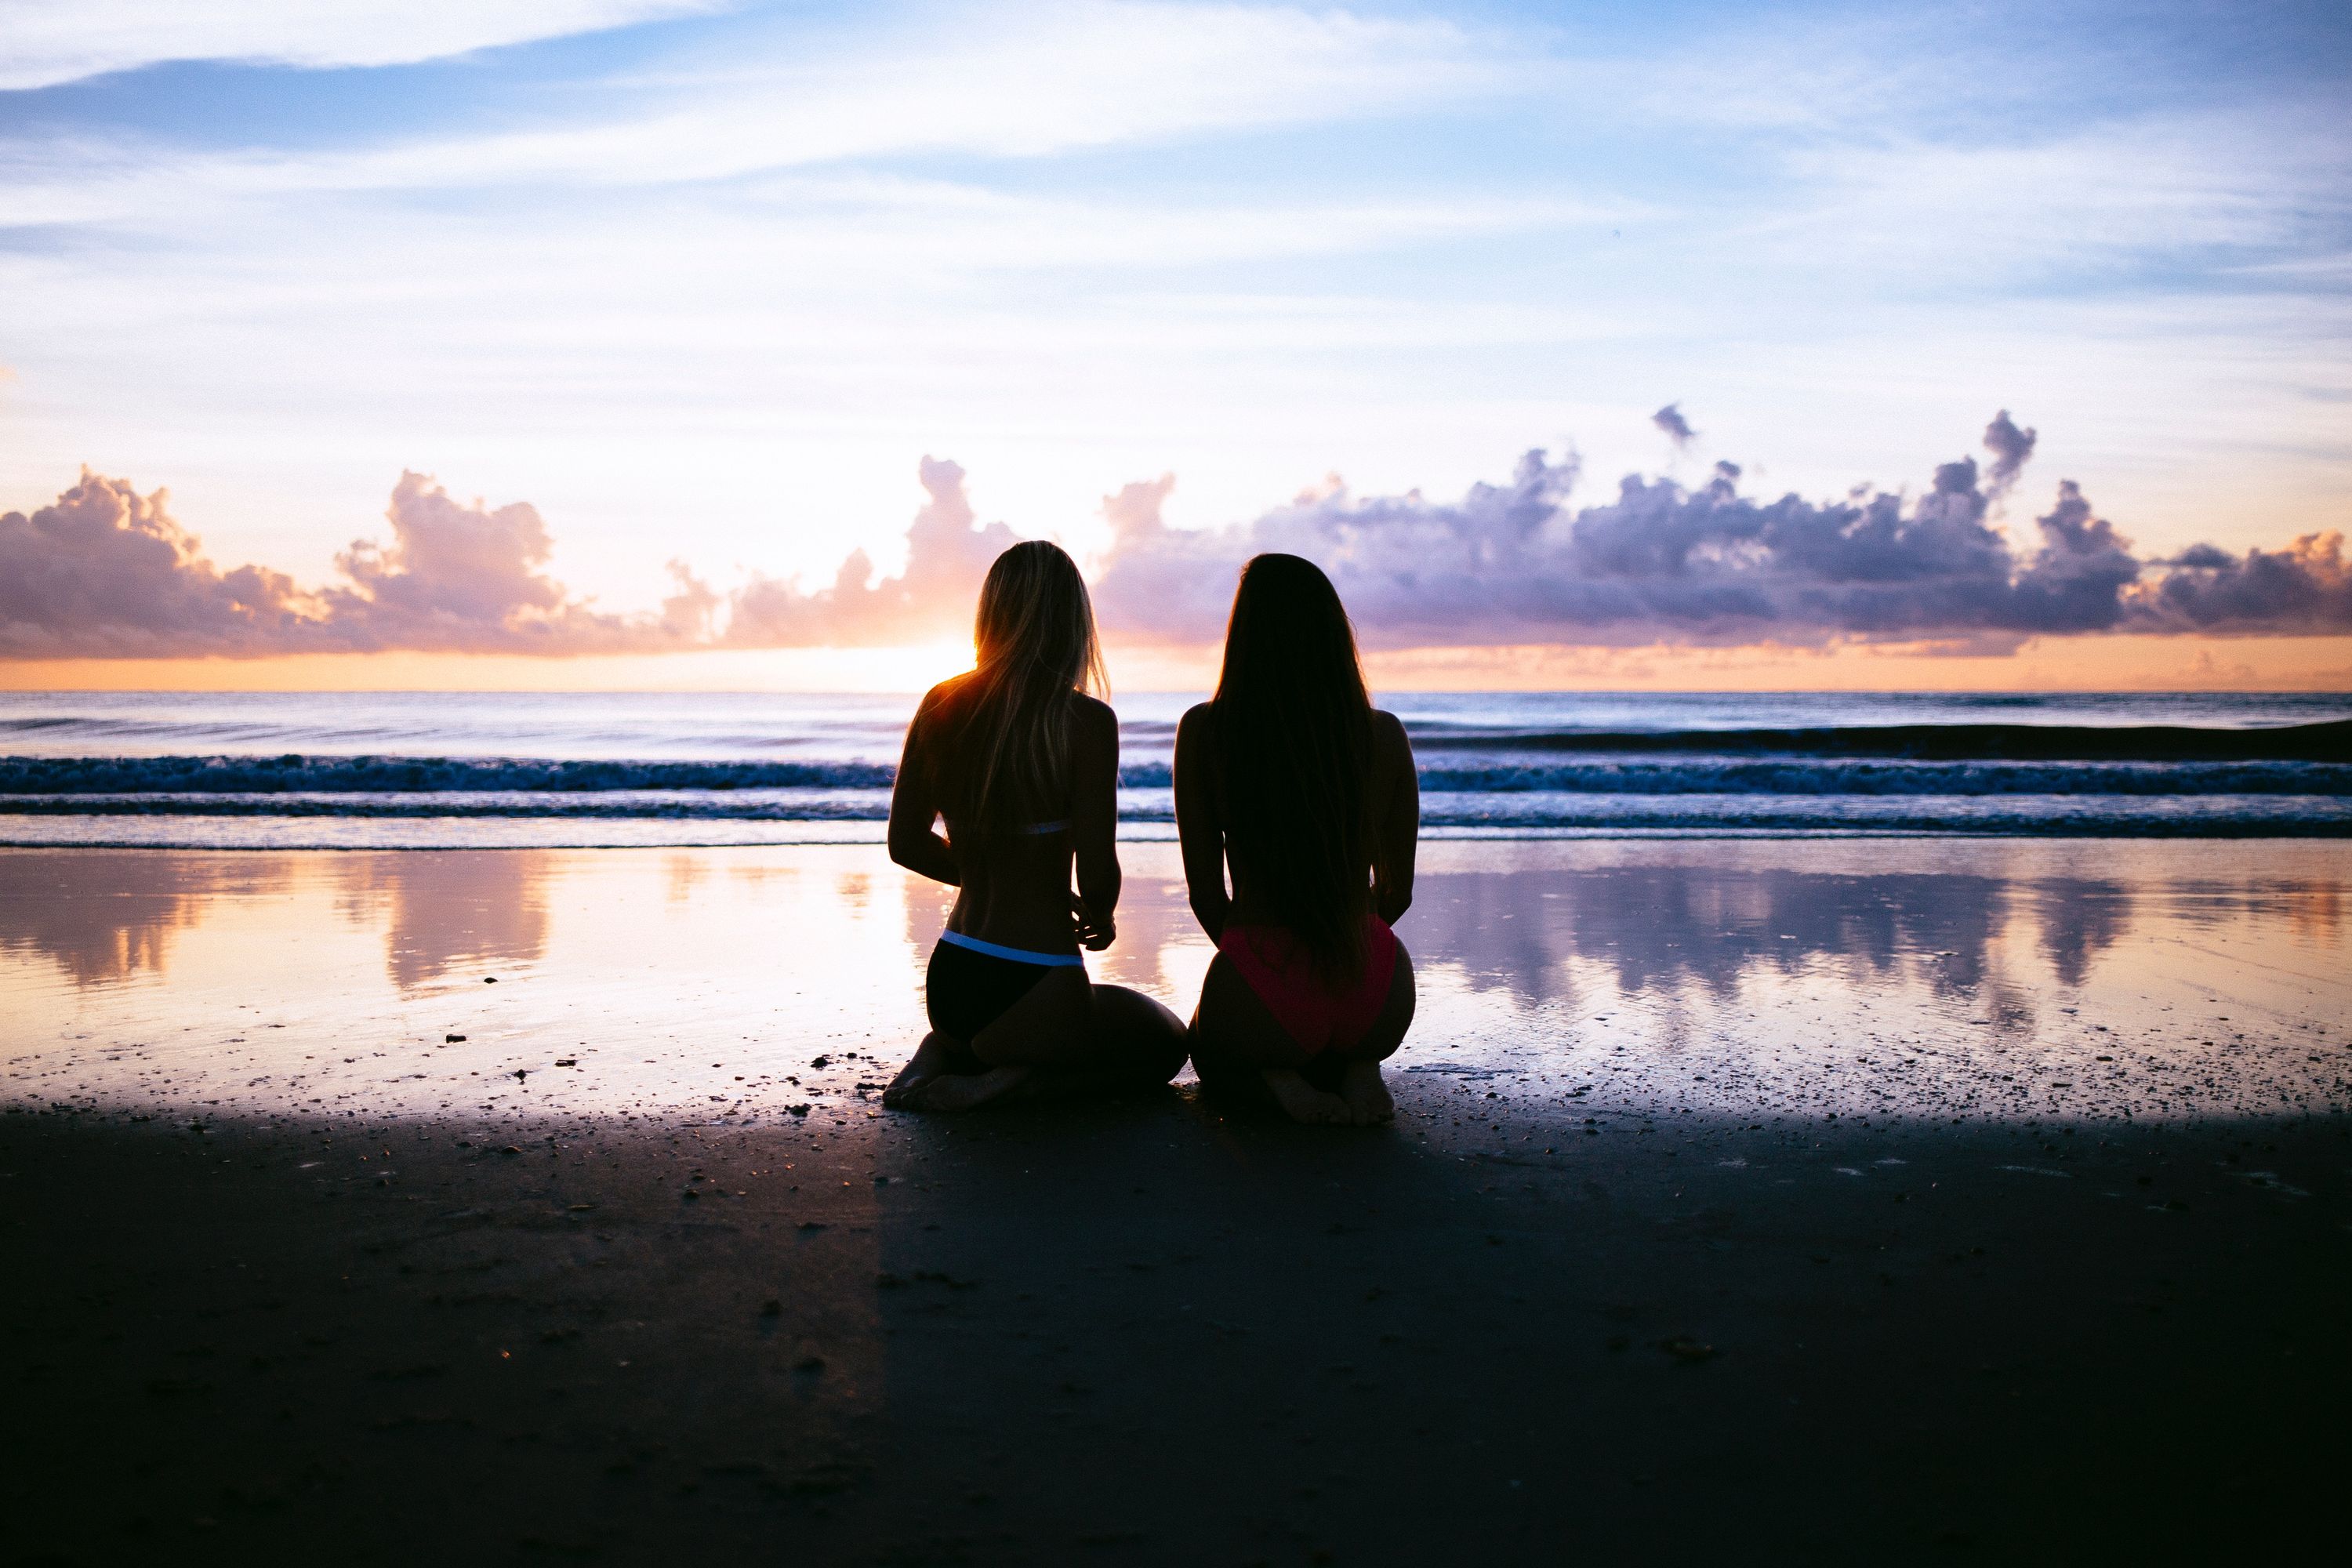 Wallpaper Of Girls, Beach, Sunset Background & Hd Image - Support And Encouragement - HD Wallpaper 